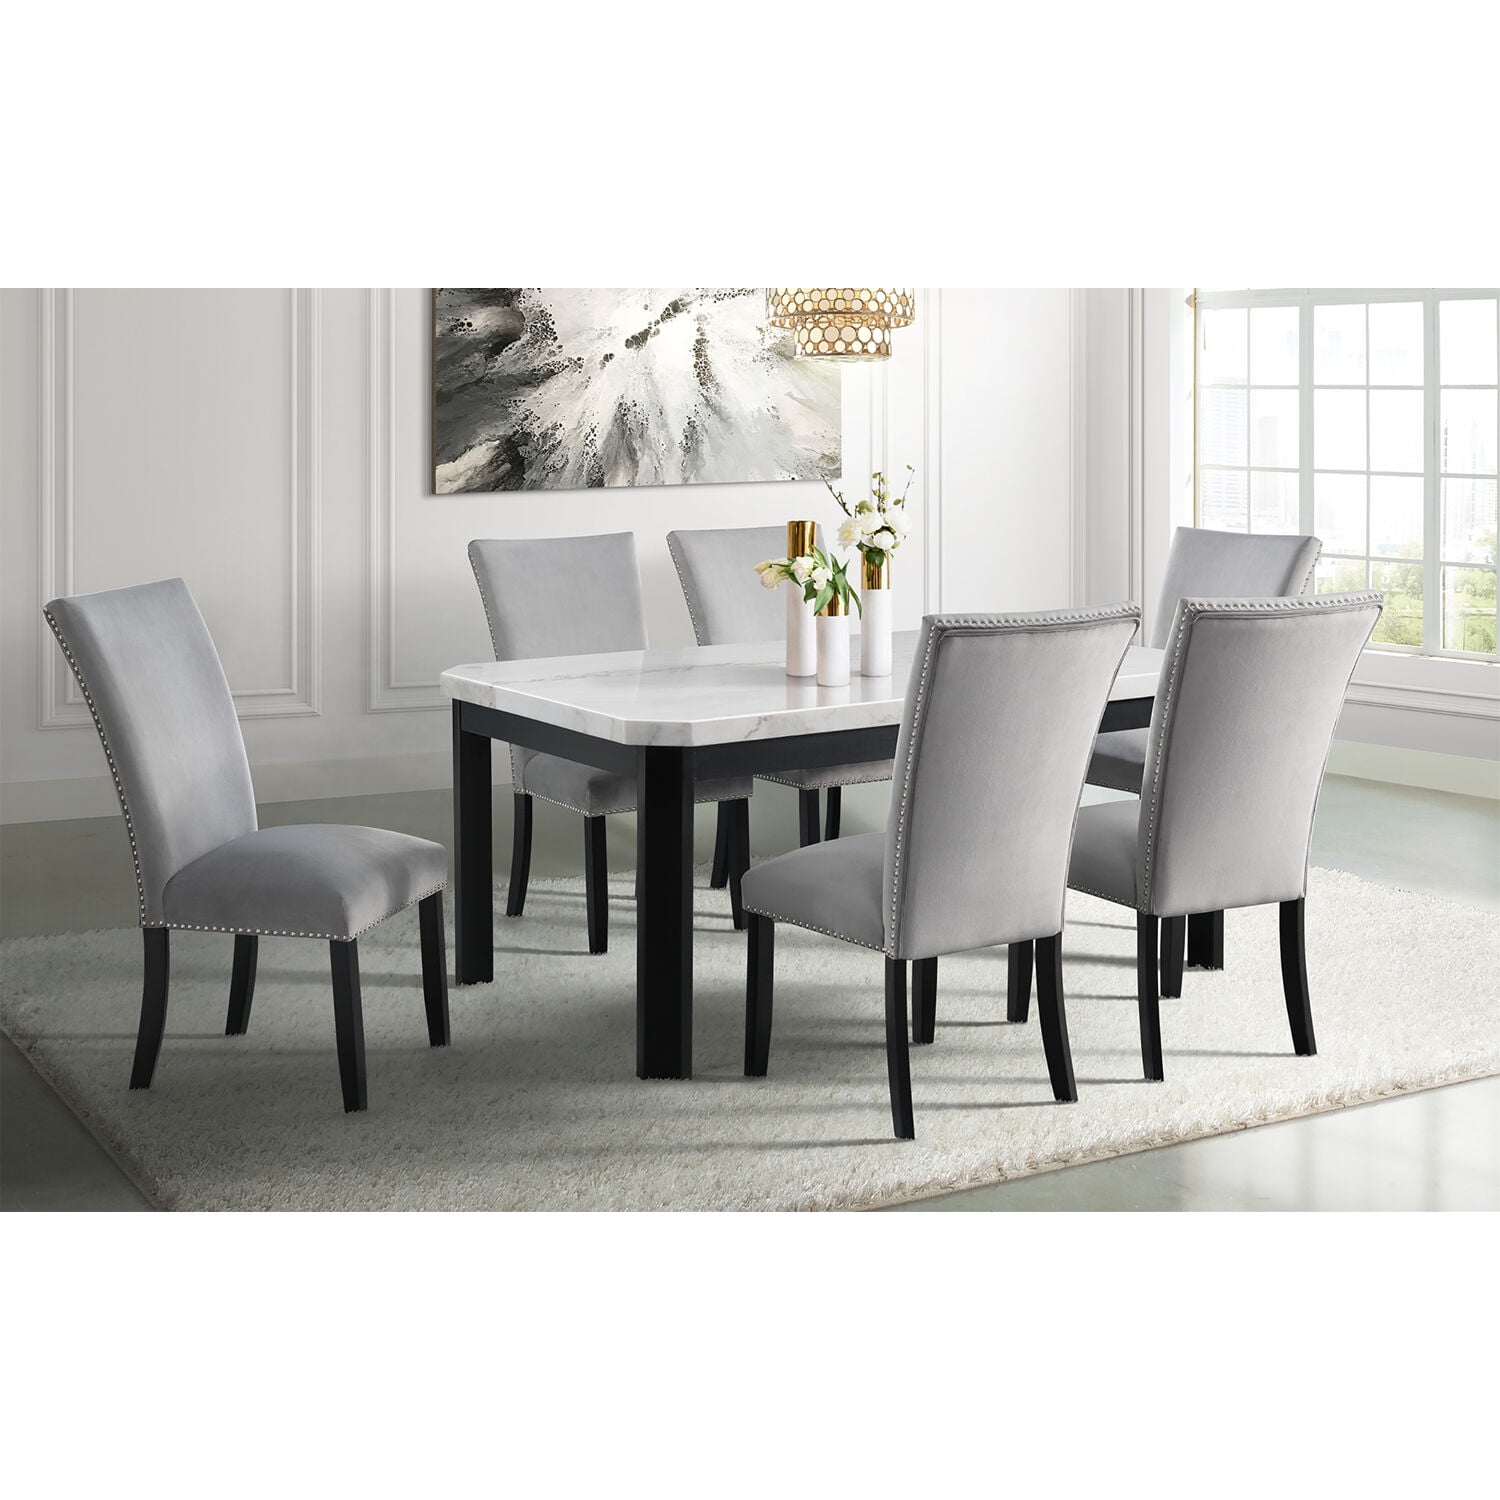 Cmf 982004-7pc-gry Solano Dining Set With Table & 6 Fabric Side Chairs, Gray - 7 Piece